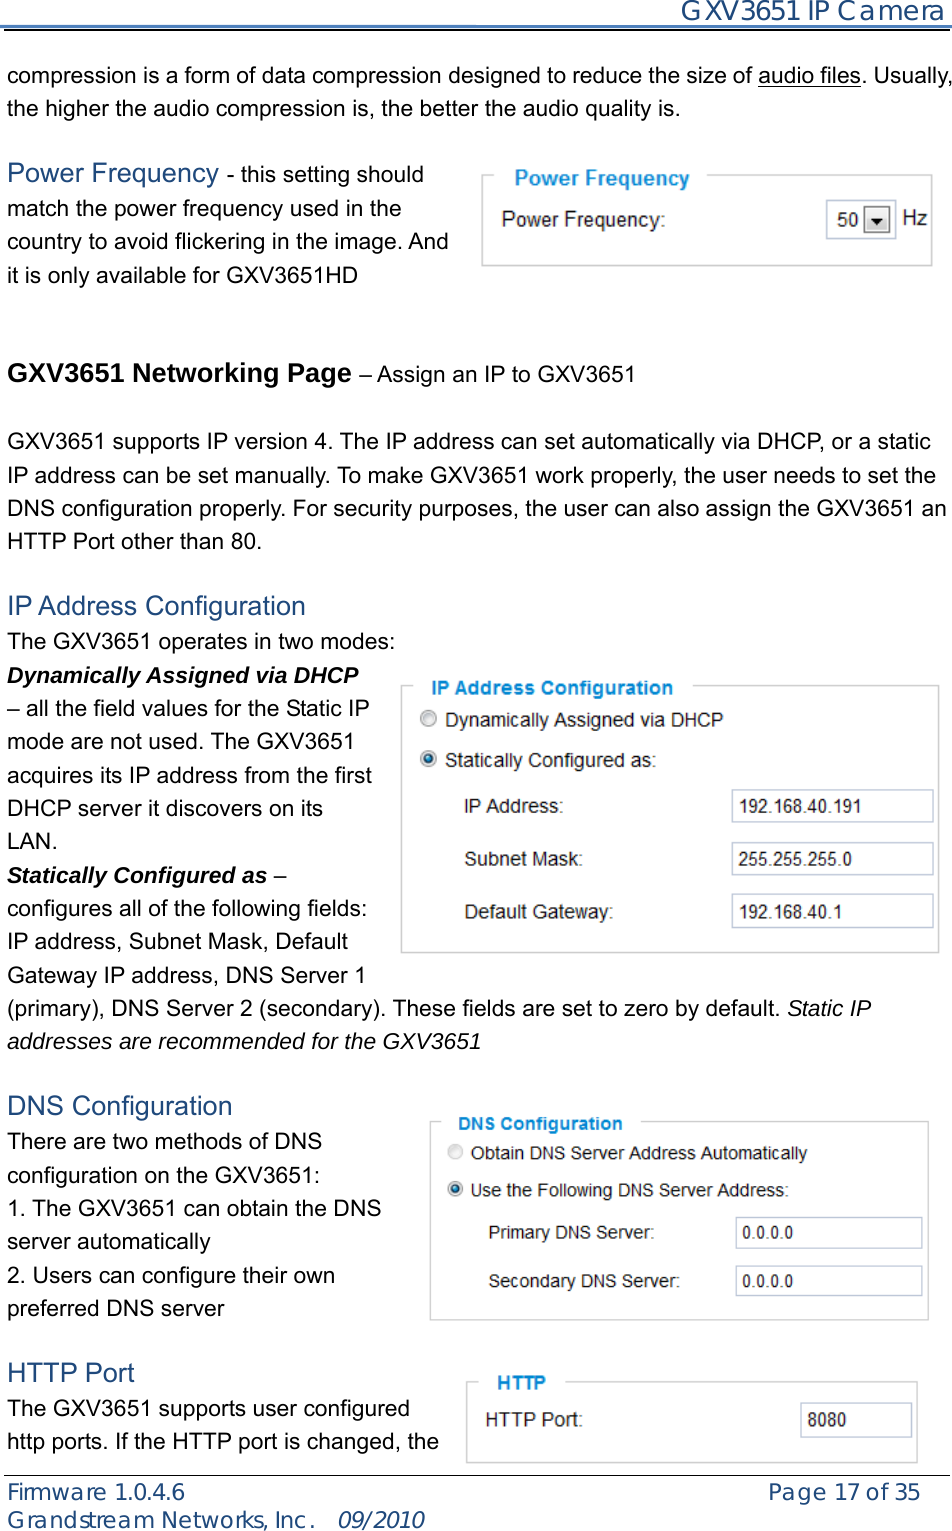     GXV3651 IP Camera Firmware 1.0.4.6                                                   Page 17 of 35    Grandstream Networks, Inc.  09/2010  compression is a form of data compression designed to reduce the size of audio files. Usually, the higher the audio compression is, the better the audio quality is.  Power Frequency - this setting should match the power frequency used in the country to avoid flickering in the image. And it is only available for GXV3651HD   GXV3651 Networking Page – Assign an IP to GXV3651  GXV3651 supports IP version 4. The IP address can set automatically via DHCP, or a static IP address can be set manually. To make GXV3651 work properly, the user needs to set the DNS configuration properly. For security purposes, the user can also assign the GXV3651 an HTTP Port other than 80.  IP Address Configuration The GXV3651 operates in two modes: Dynamically Assigned via DHCP – all the field values for the Static IP mode are not used. The GXV3651 acquires its IP address from the first DHCP server it discovers on its LAN.  Statically Configured as – configures all of the following fields: IP address, Subnet Mask, Default Gateway IP address, DNS Server 1 (primary), DNS Server 2 (secondary). These fields are set to zero by default. Static IP addresses are recommended for the GXV3651  DNS Configuration   There are two methods of DNS configuration on the GXV3651: 1. The GXV3651 can obtain the DNS server automatically 2. Users can configure their own preferred DNS server  HTTP Port   The GXV3651 supports user configured http ports. If the HTTP port is changed, the 